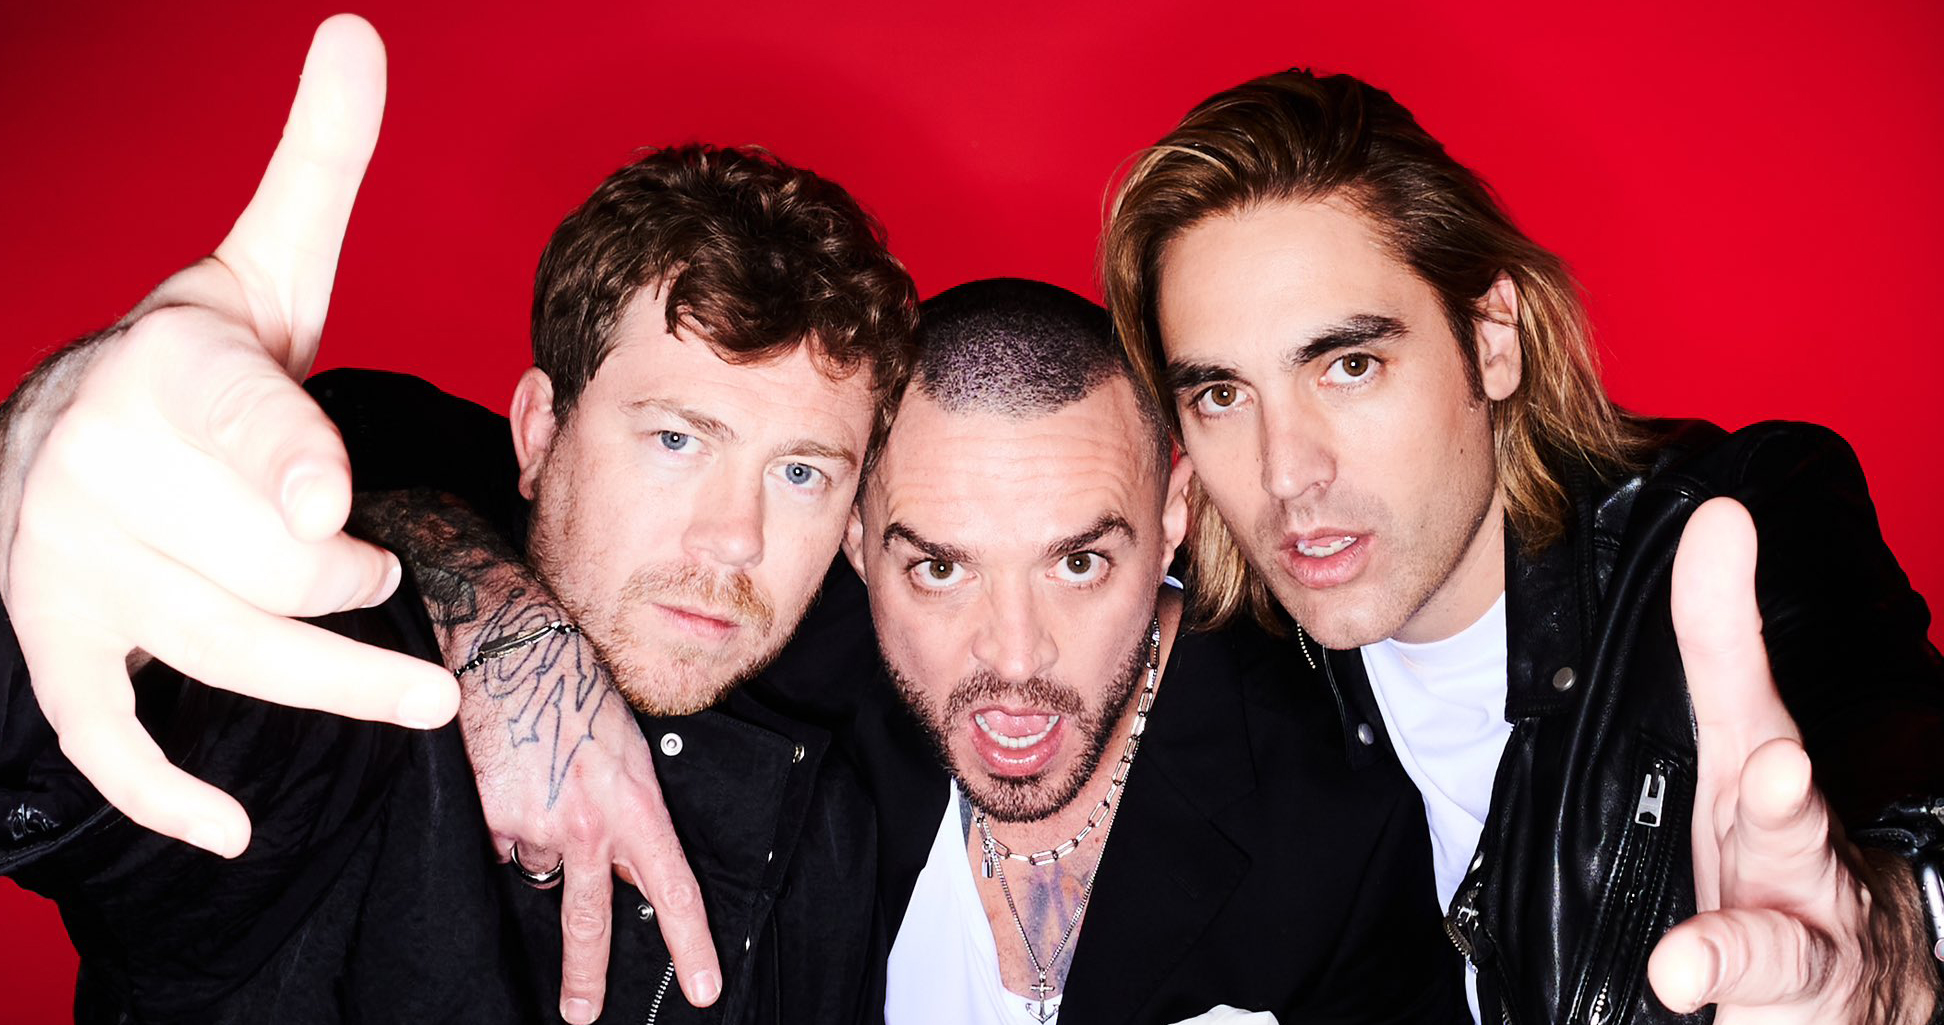 Busted announce 20th Anniversary Greatest Hits Tour with Hanson and Loser Kid 2.0 release with Simple Plan